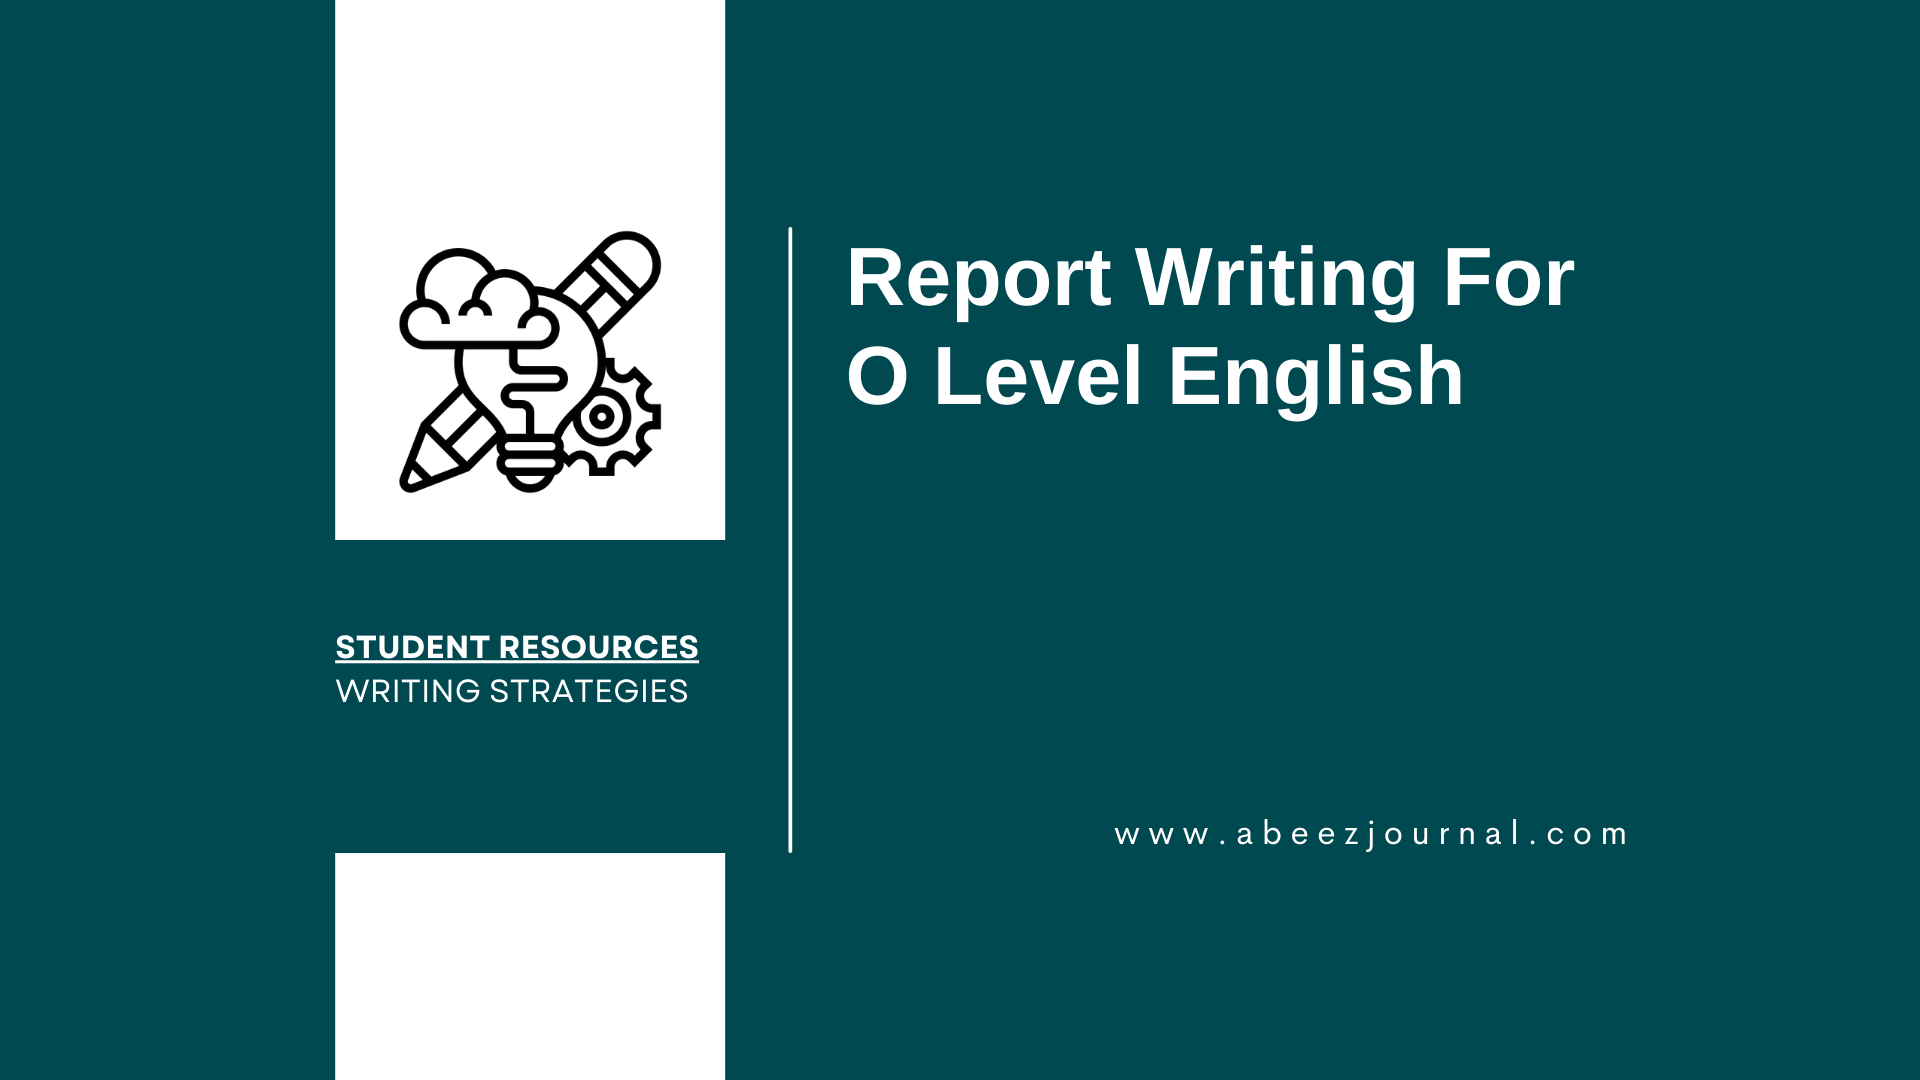 report writing for o level english featured image